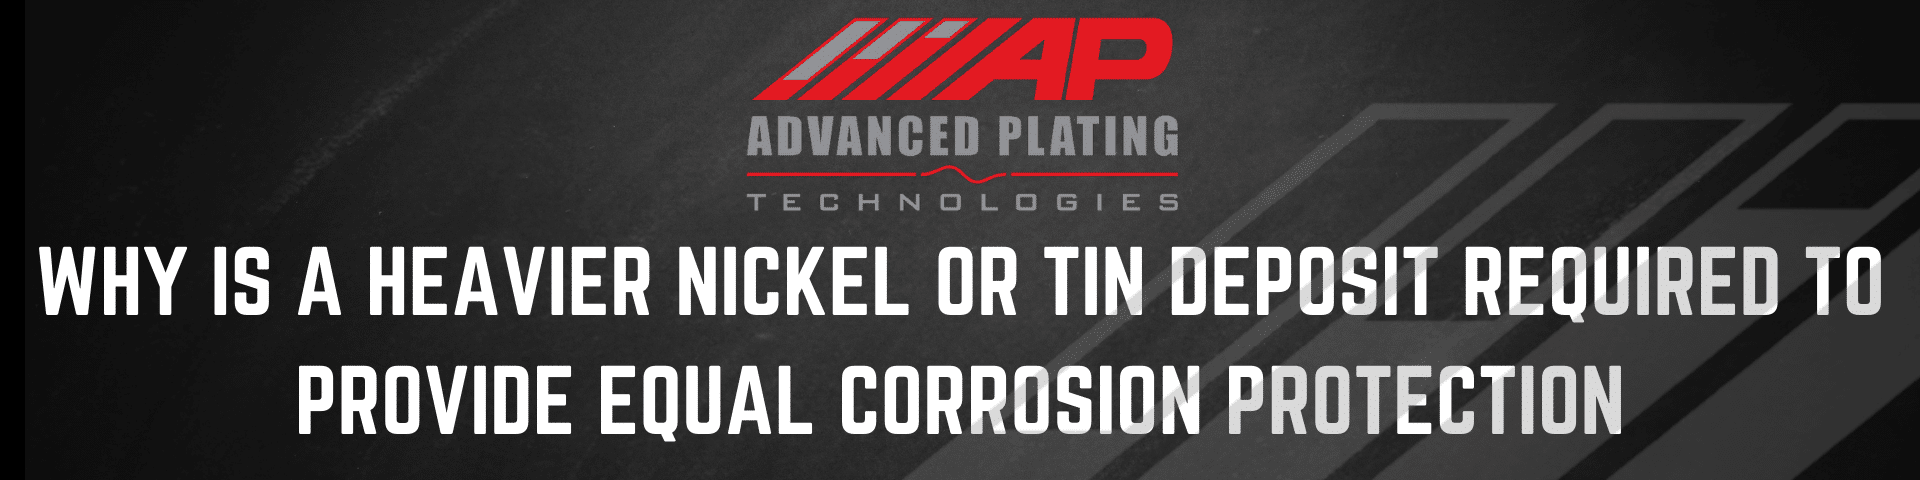 Why is heavier nickel or tin deposit required to provide equal corrosion protection?